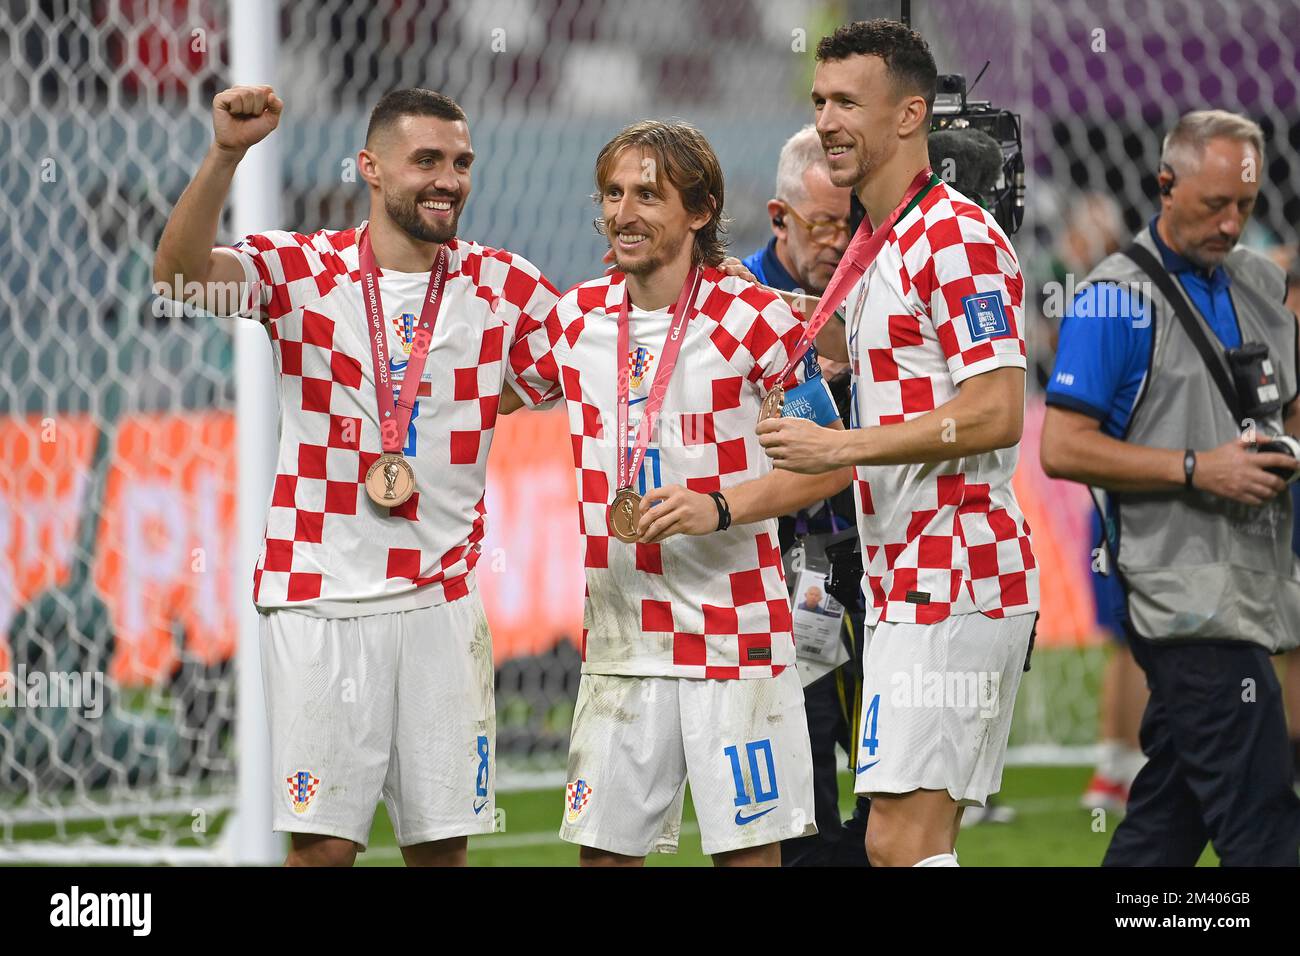 From left: Mateo KOVACIC (CRO), Luka MODRIC (CRO), Ivan PERISIC (CRO), award ceremony with medals, jubilation, joy, enthusiasm. Third place match, match for 3rd place, game 63, Croatia (CRO) - Morocco (MAR) 2-1 on 12/17/2022, Khalifa International Stadium Football World Cup 20122 in Qatar from 11/20 - 18.12.2022 ? Stock Photo